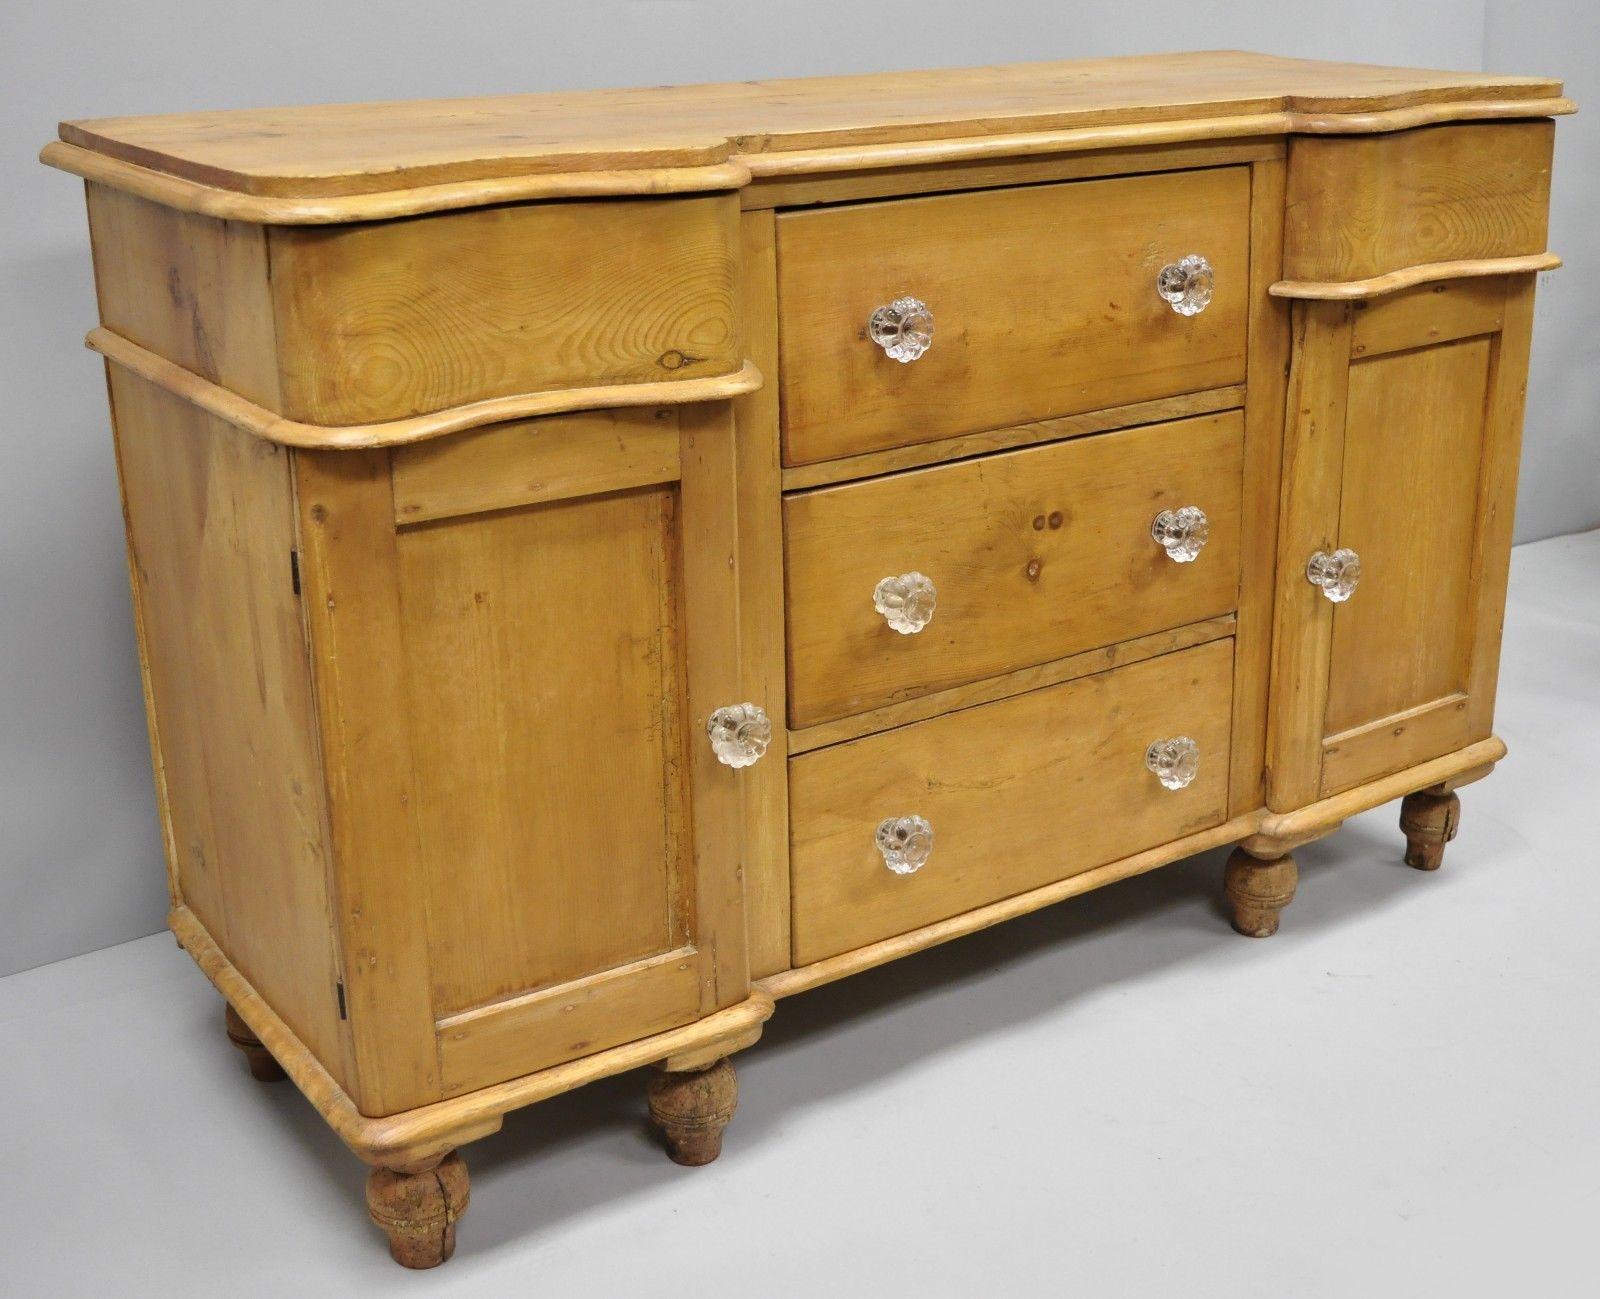 Knotty Pine French Country Primitive Sideboard Server Buffet Cabinet Glass Knobs 3